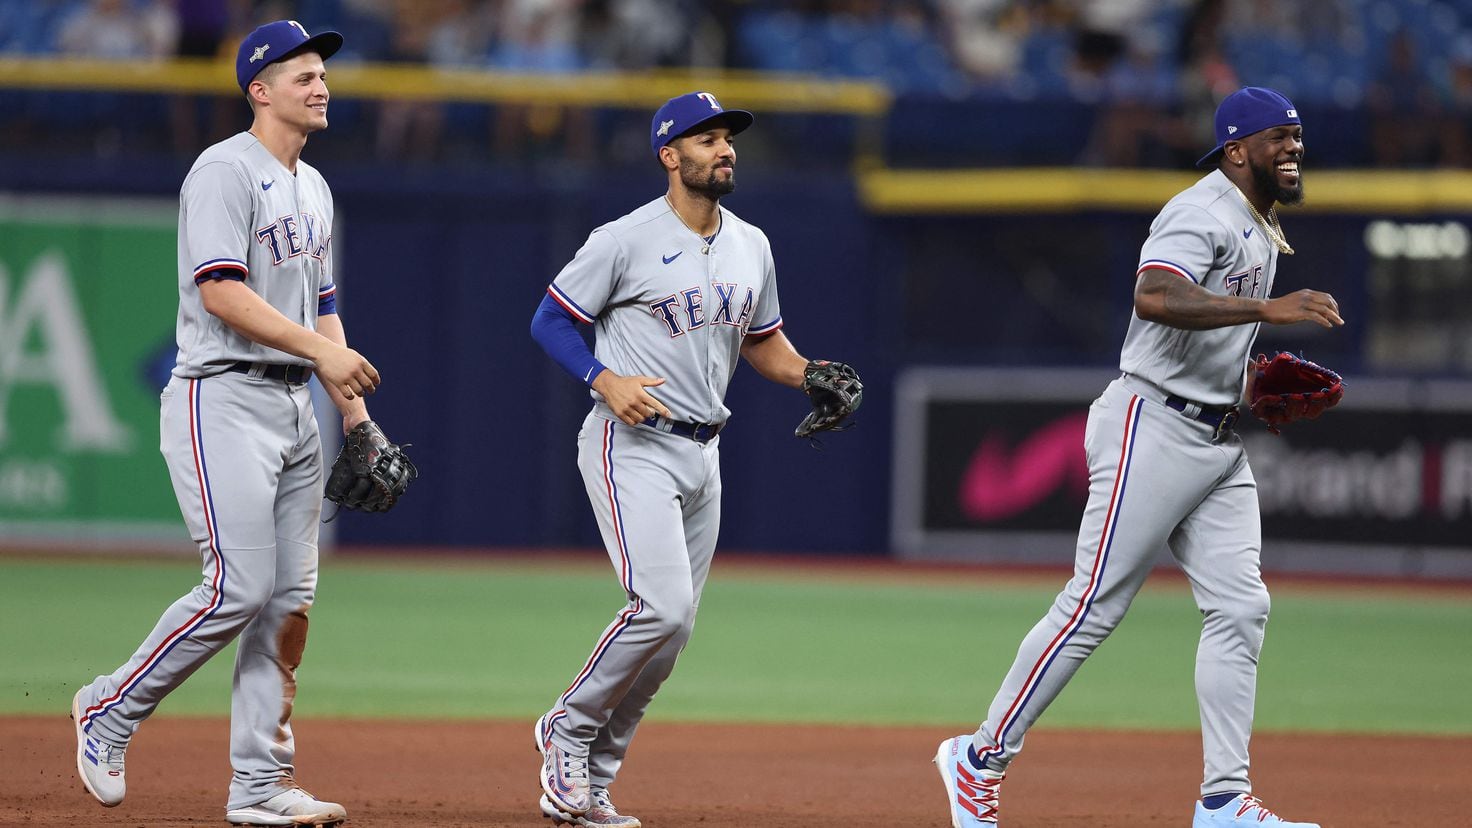 Orioles vs Rangers summary online: stats, scores and highlights